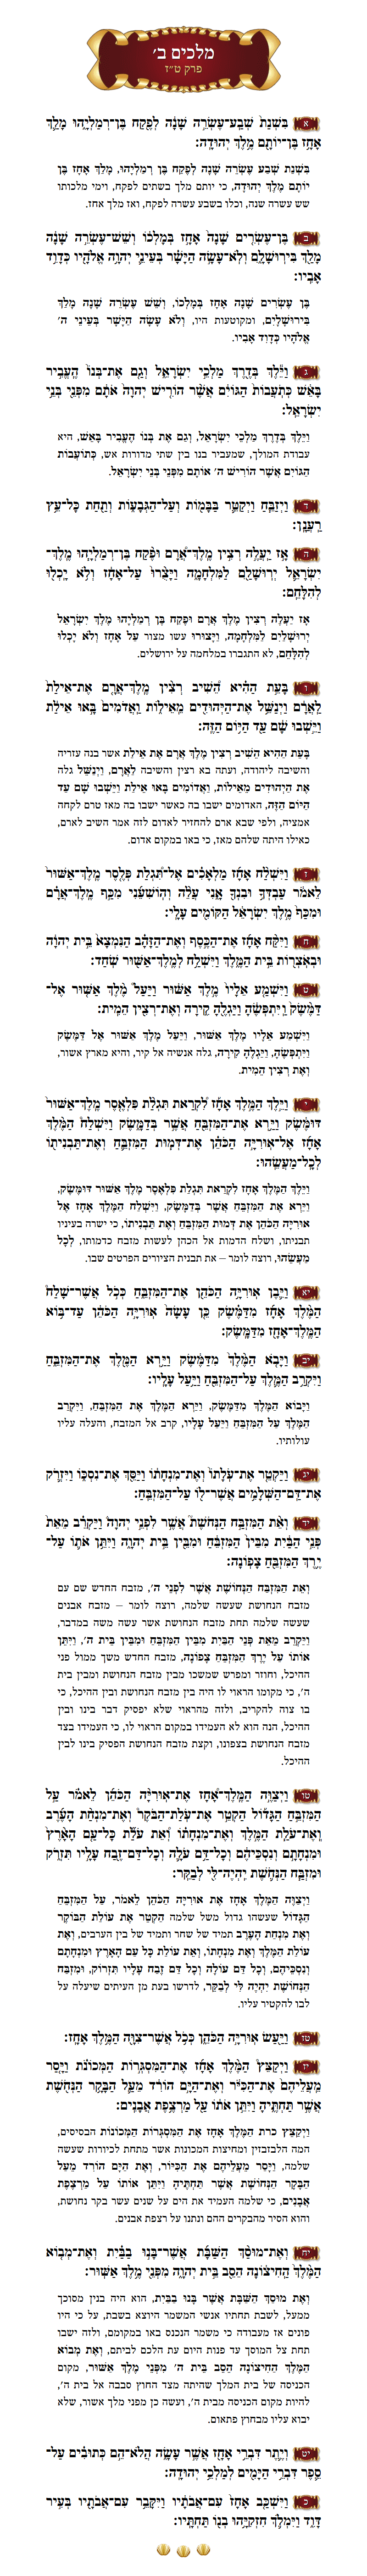 Sefer Melachim-2 Chapter 16 with commentary